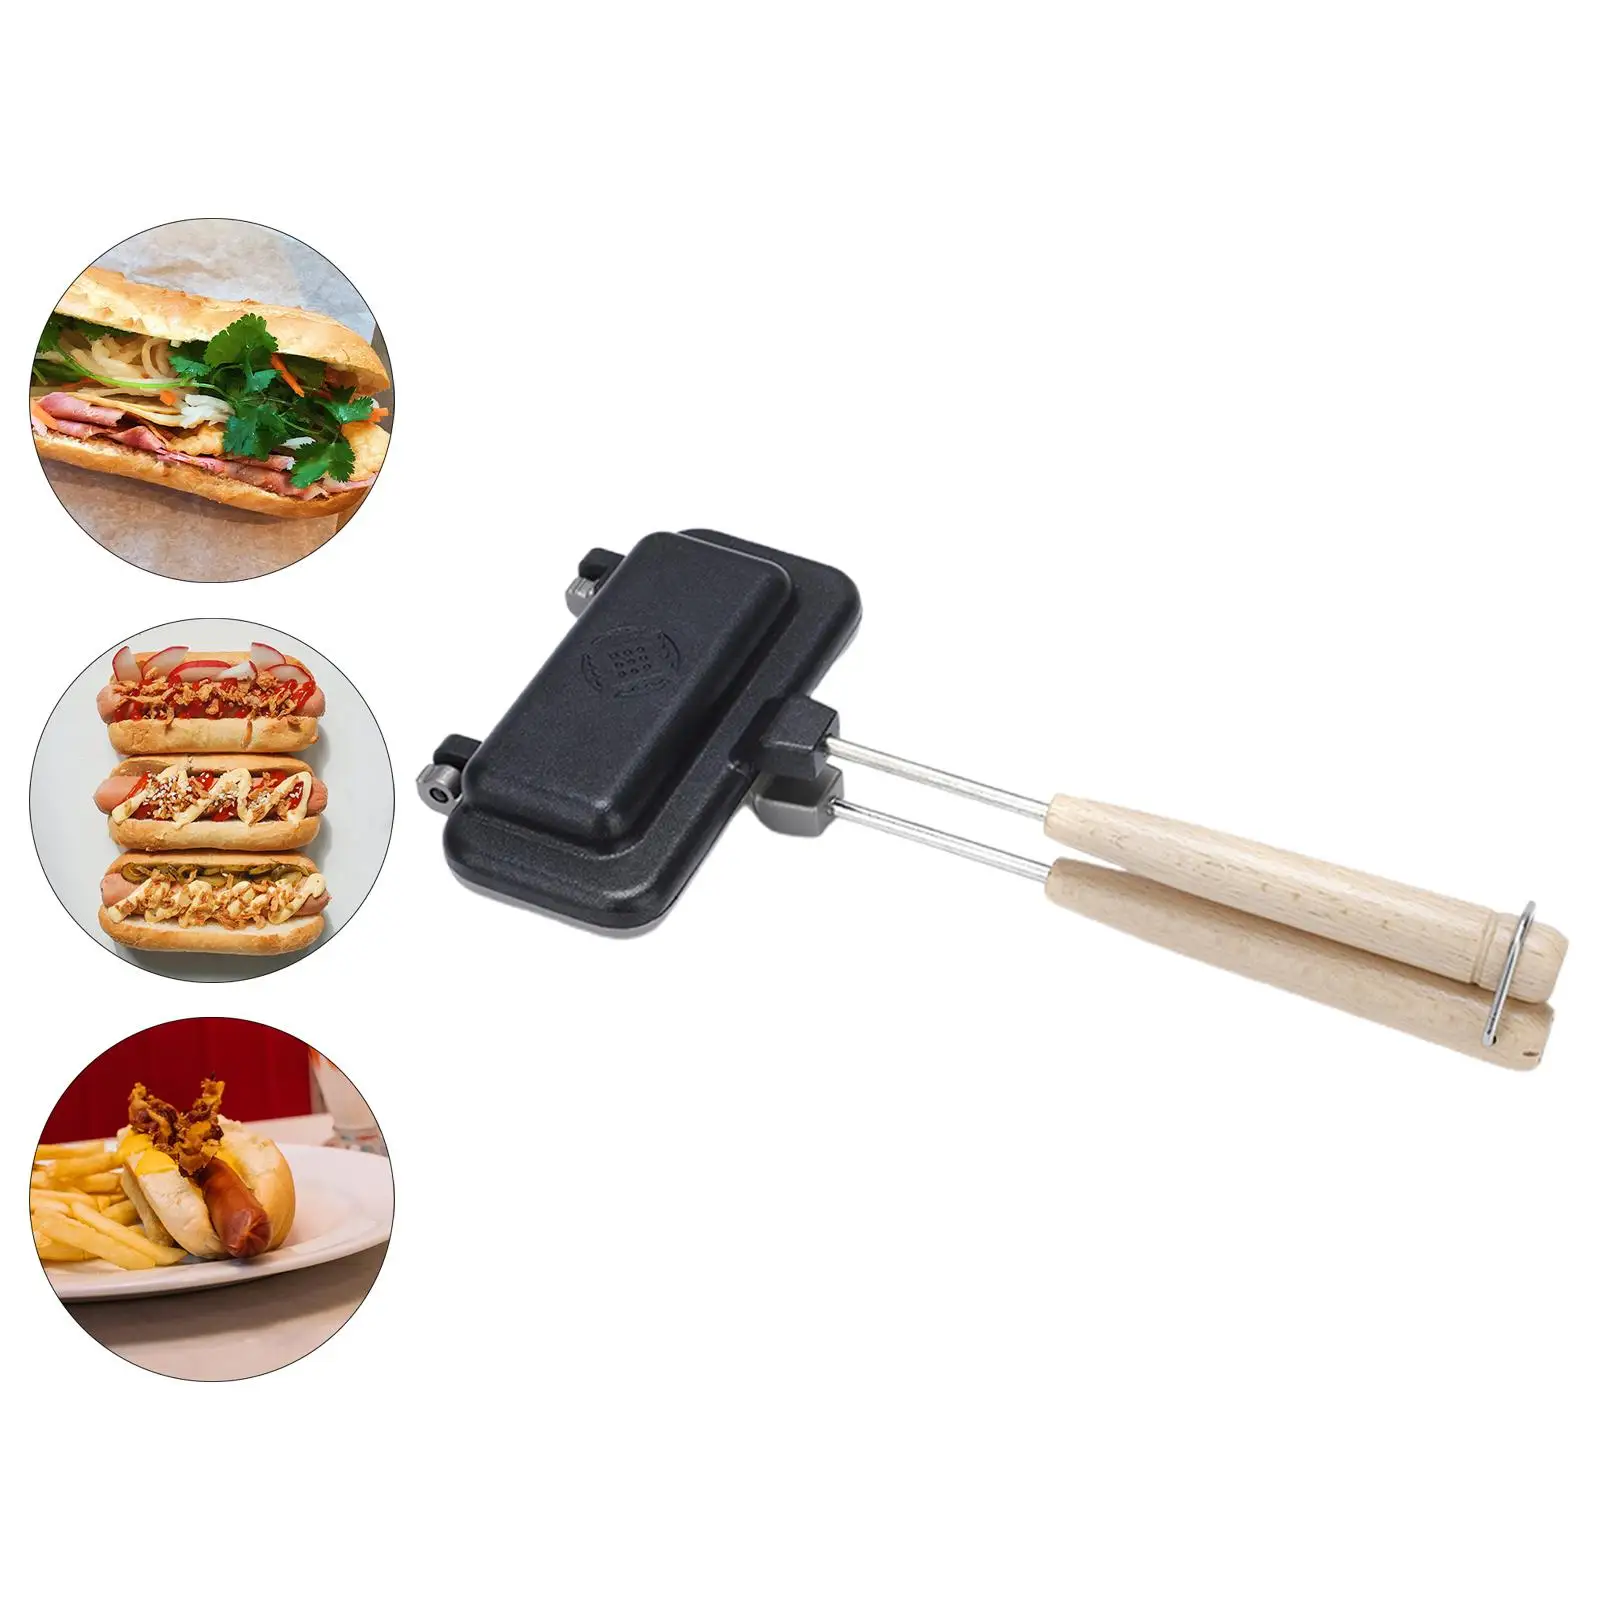 Sandwich Maker Detachable Portable Pancake Maker Fast Heating Pie Maker Rectangle for Pancakes Lunch Toast Muffins Dining Room